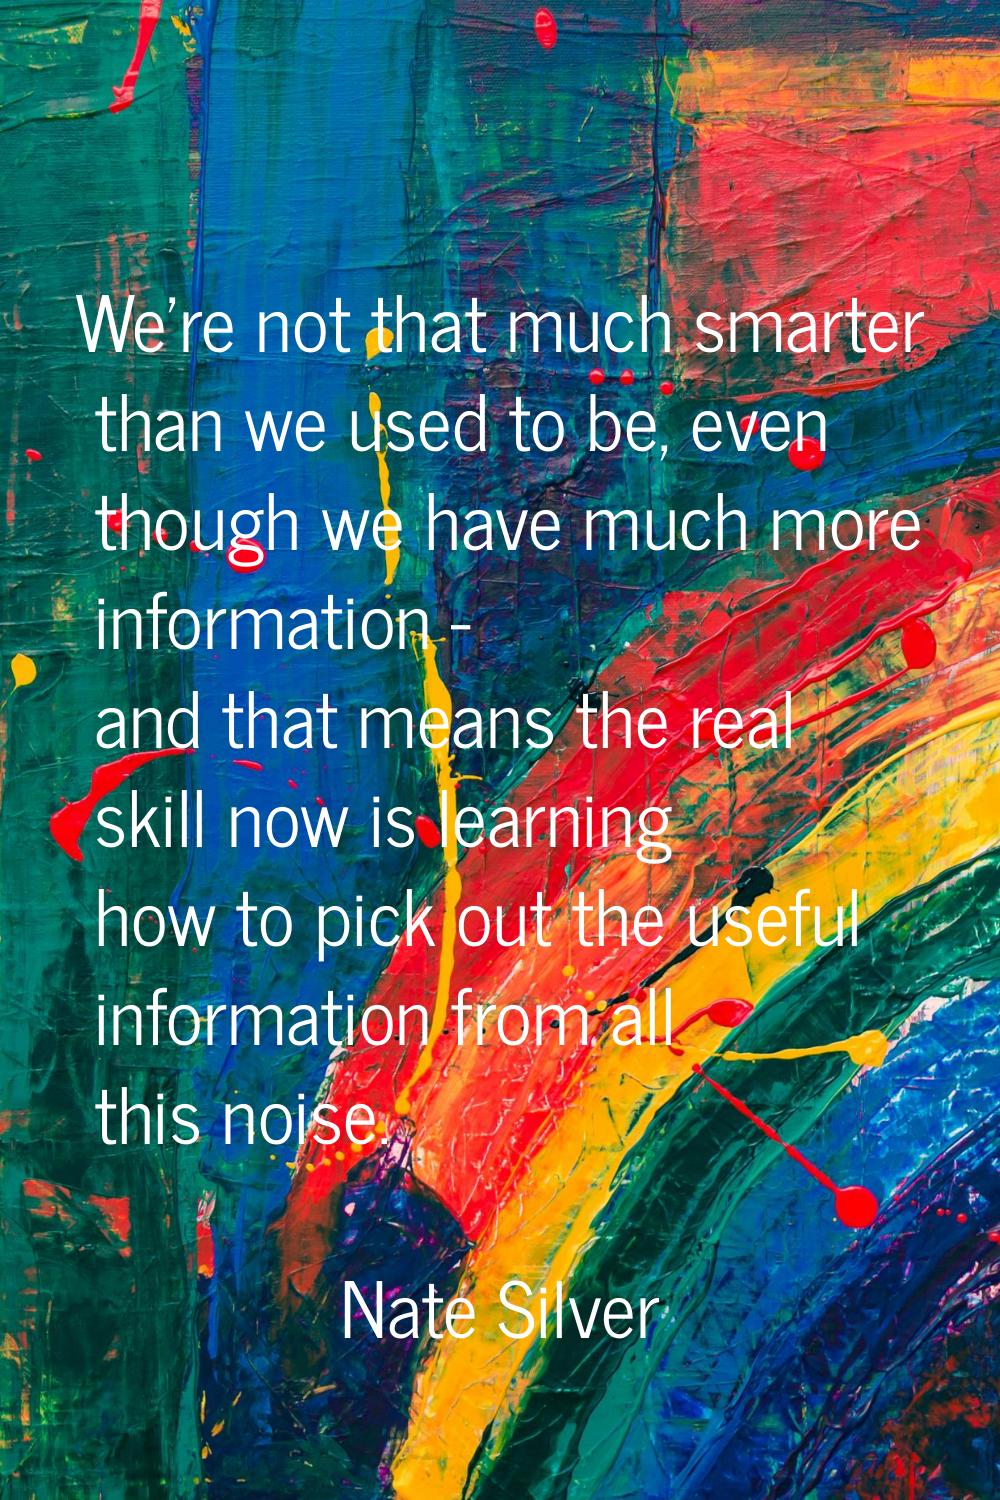 We're not that much smarter than we used to be, even though we have much more information - and tha